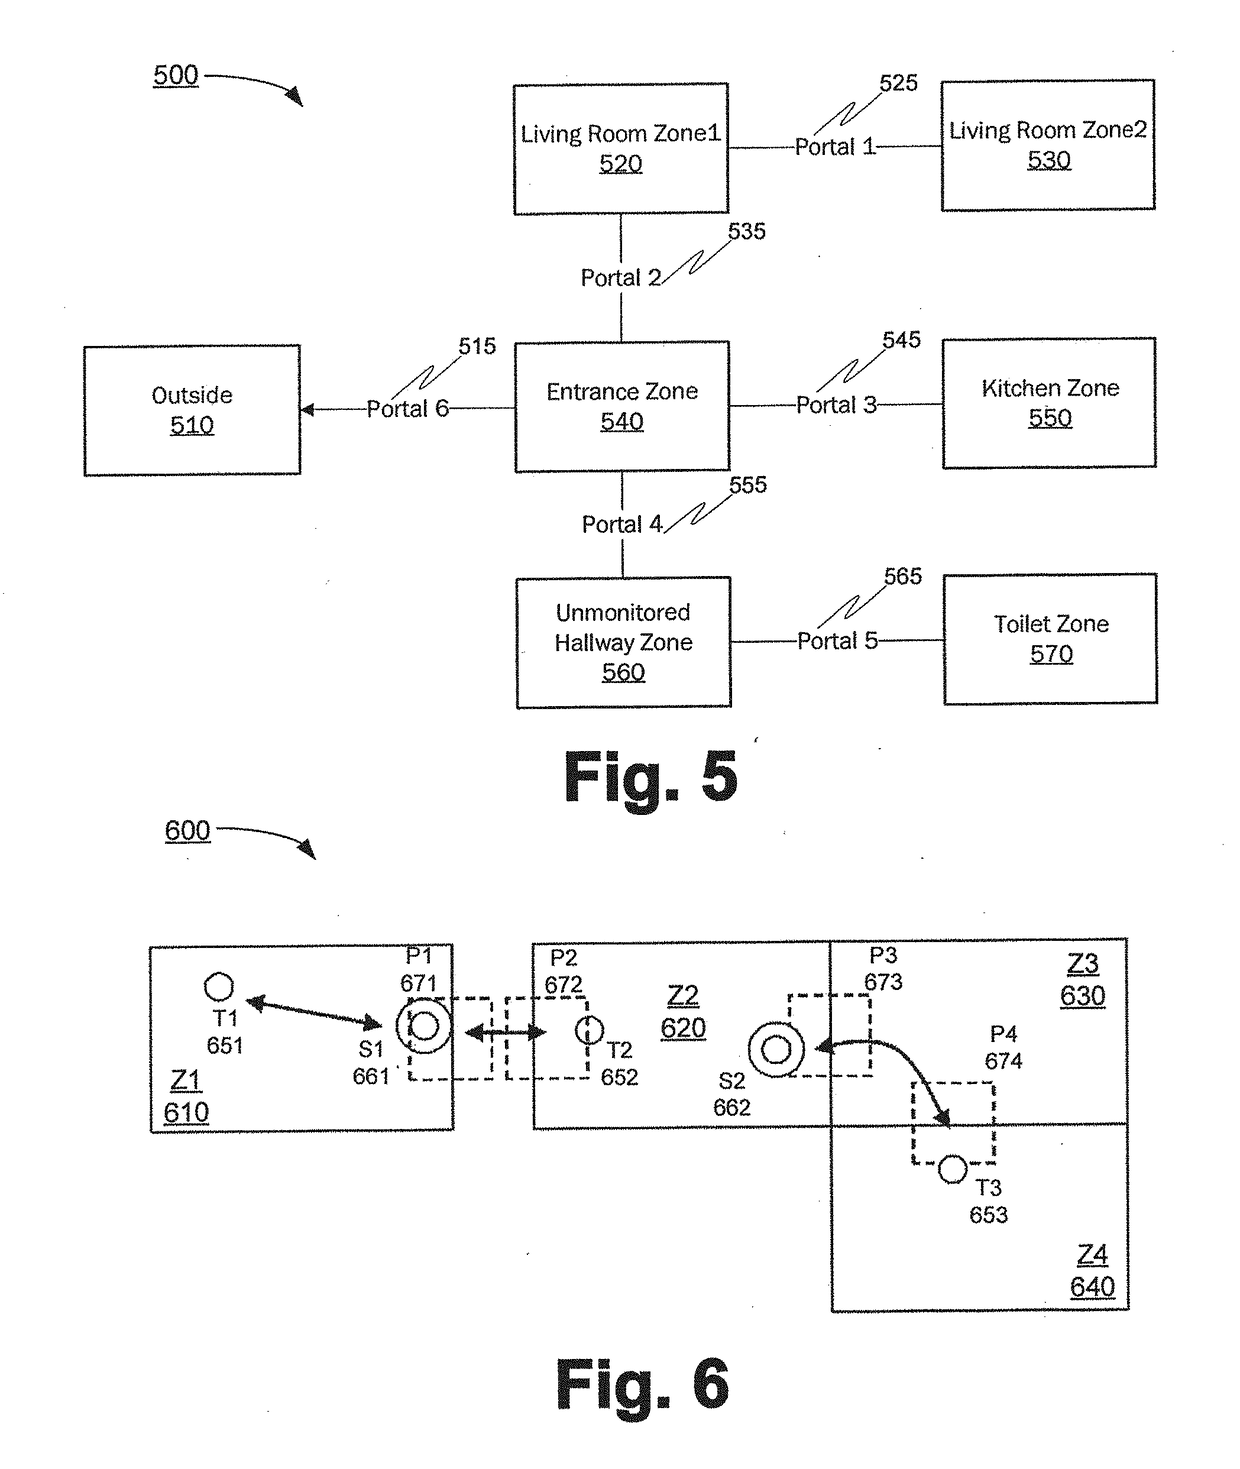 Apparatus and method for occupancy detection